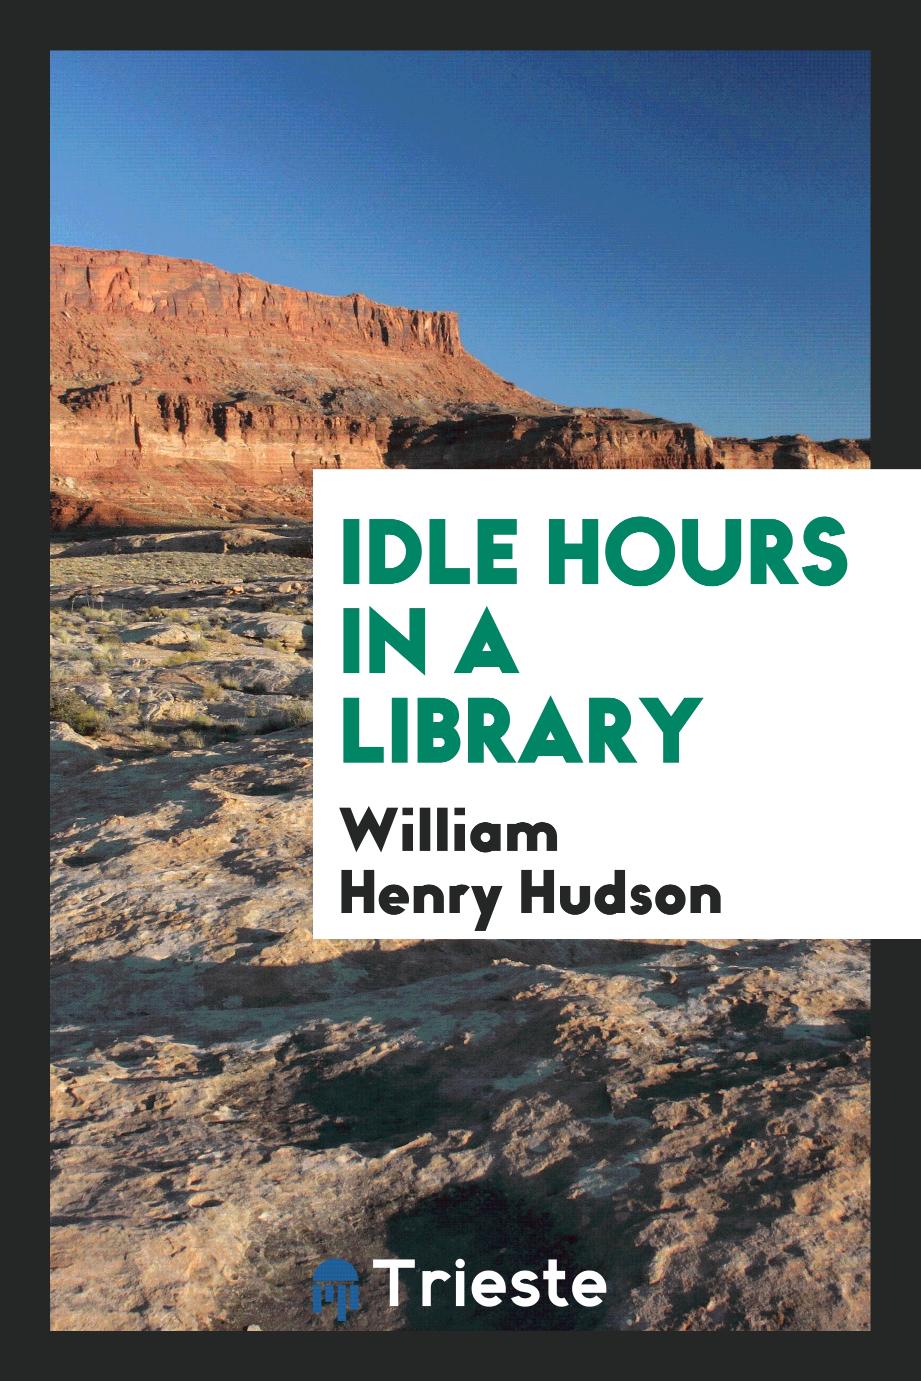 Idle hours in a library